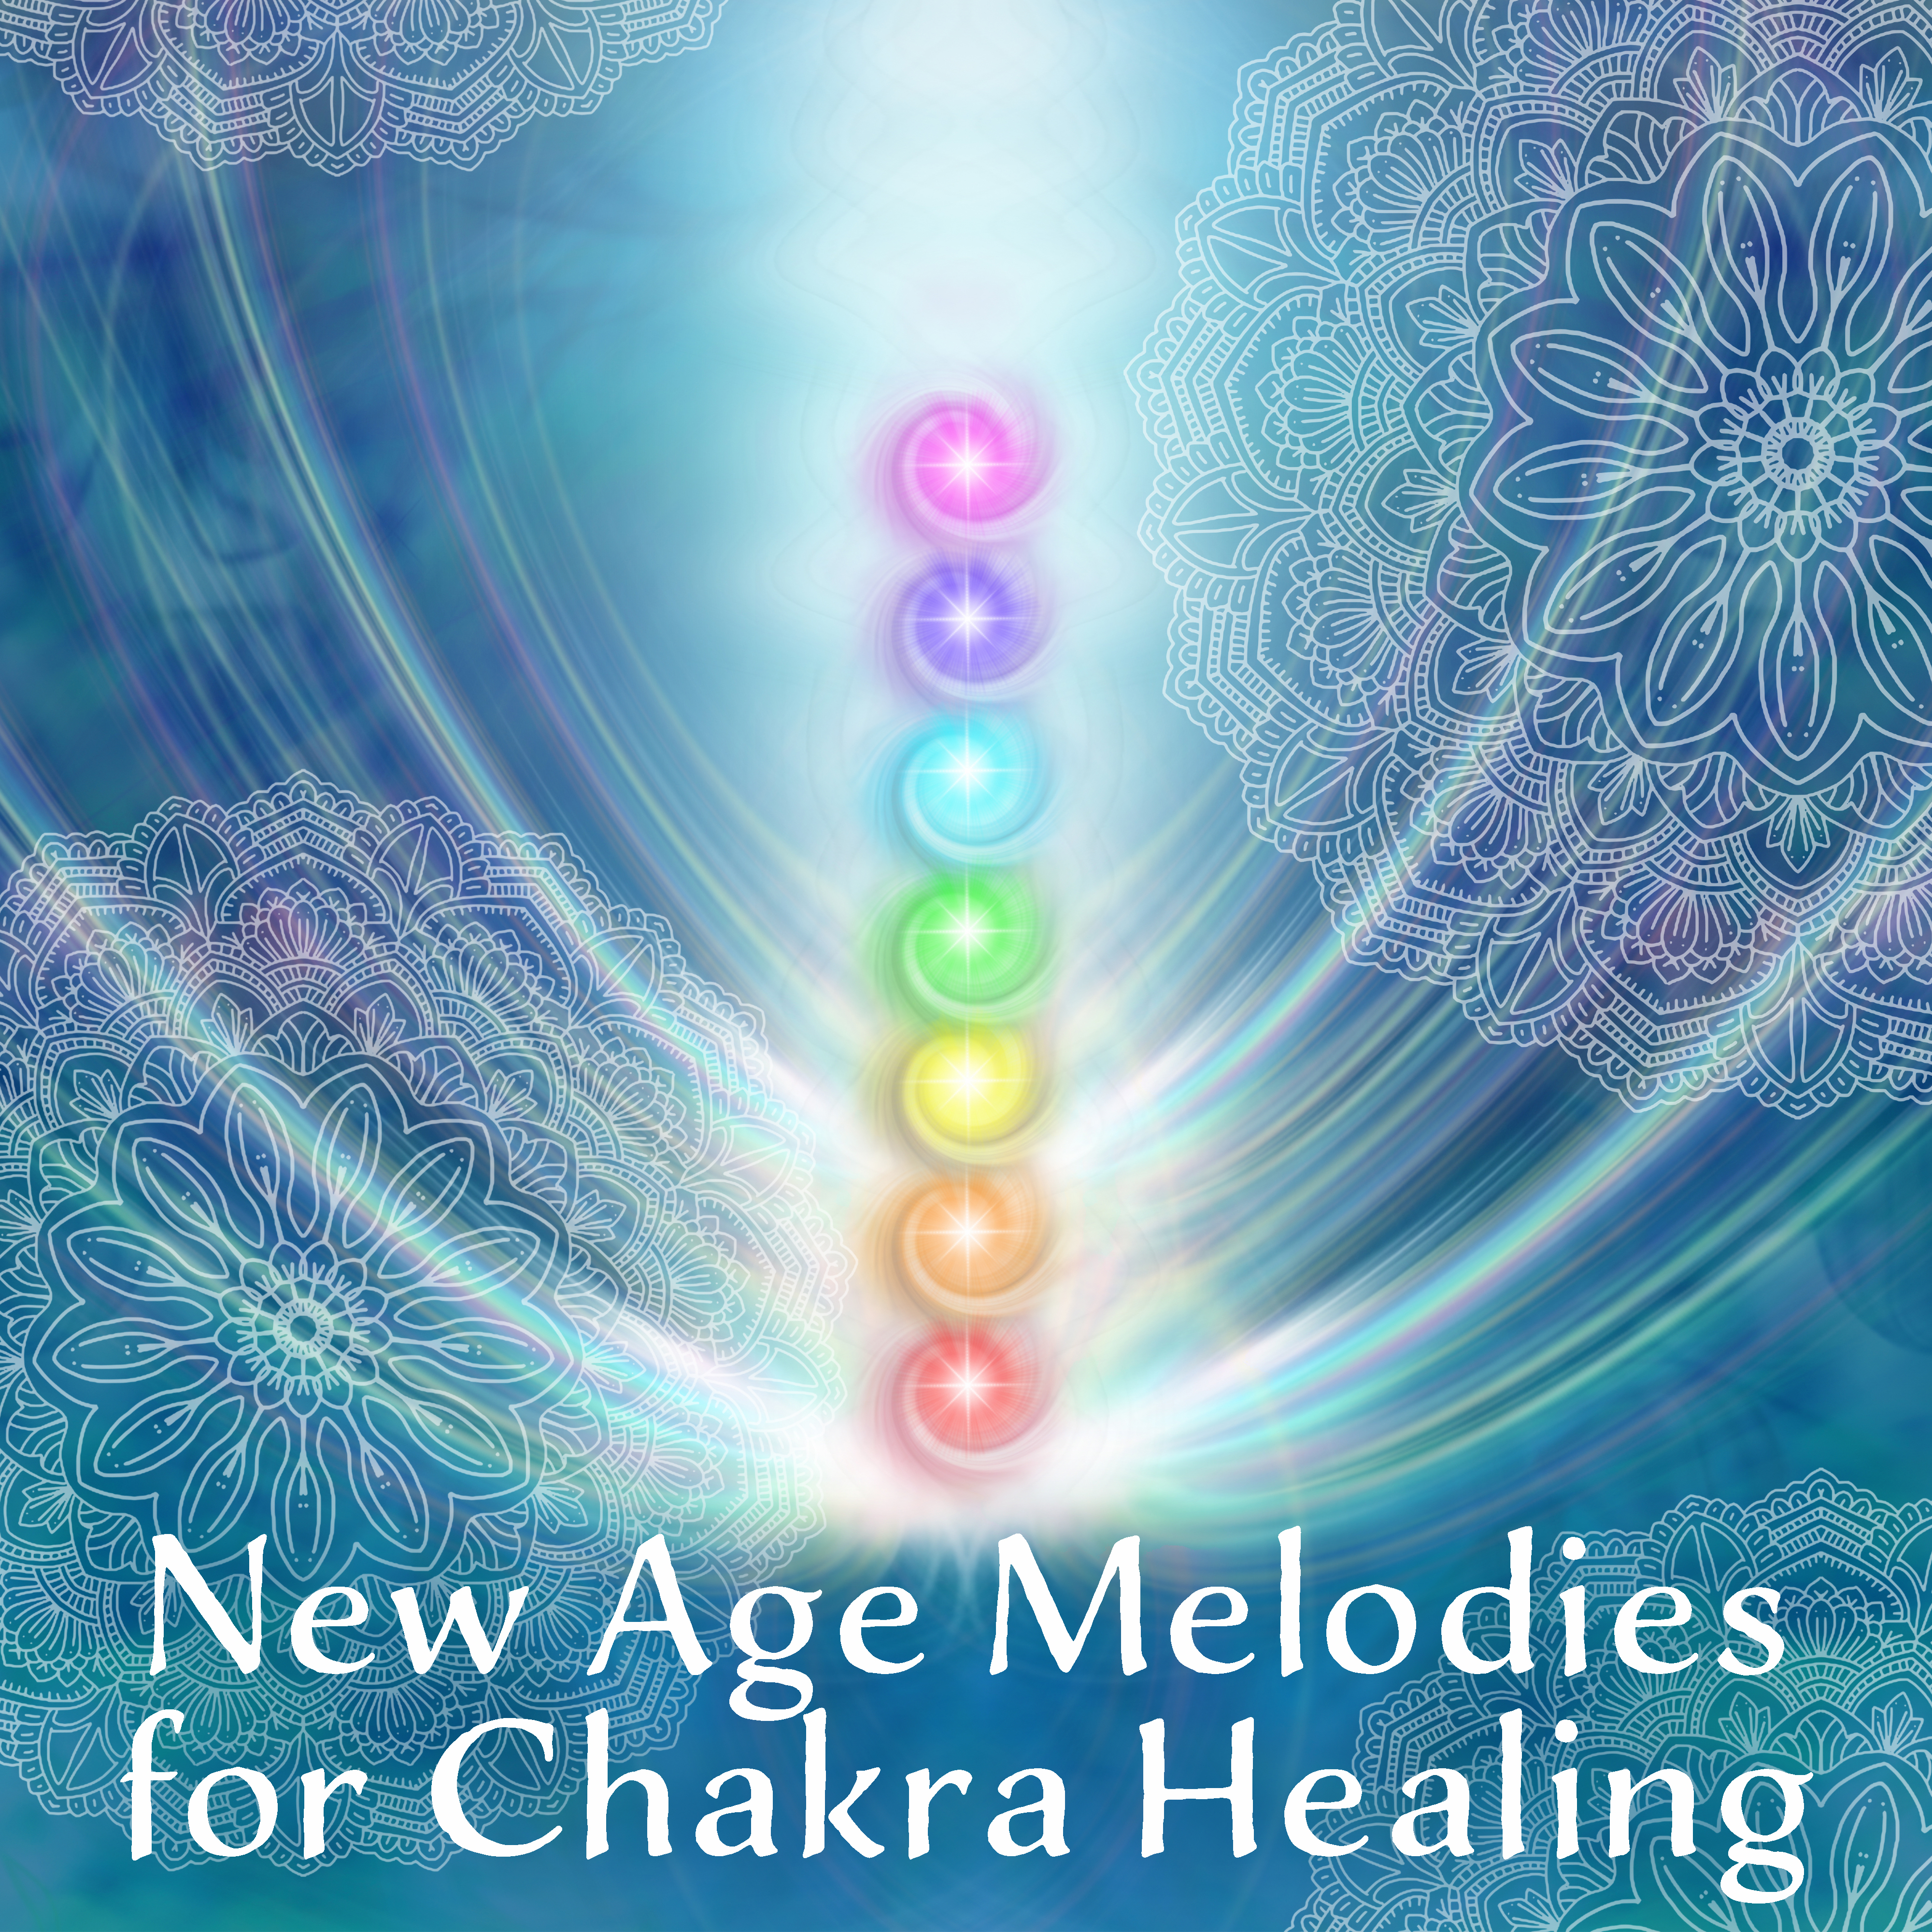 New Age Melodies for Chakra Healing